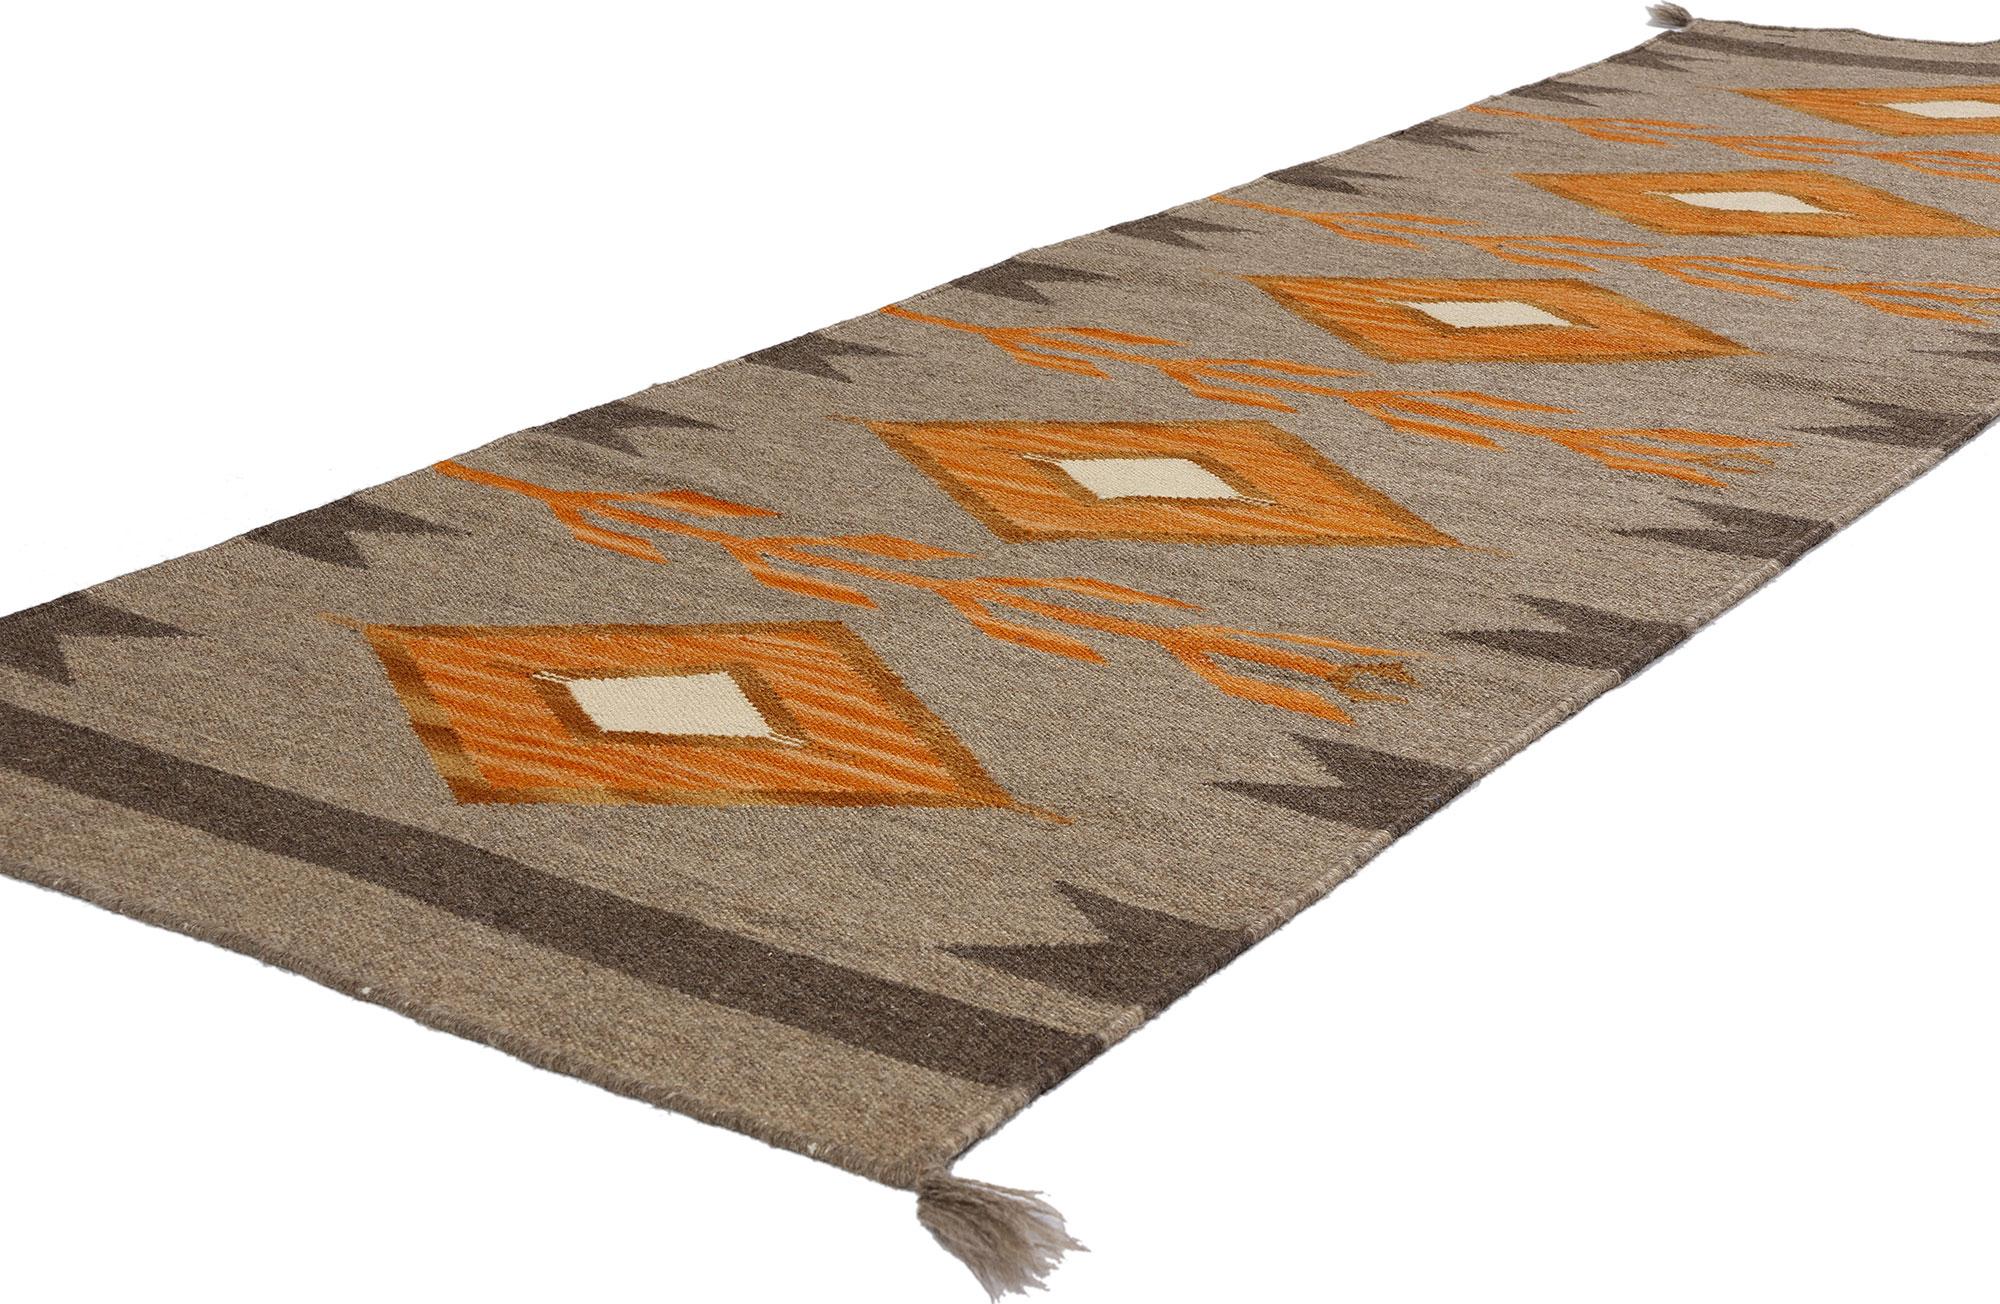 81051 Southwest Modern Horse Blanket Navajo-Style Rug Runner, 02'06 x 08'00. Experience the serene convergence of Native American design influences in this meticulously handwoven Navajo-inspired rug runner, where the captivating allure of Southwest